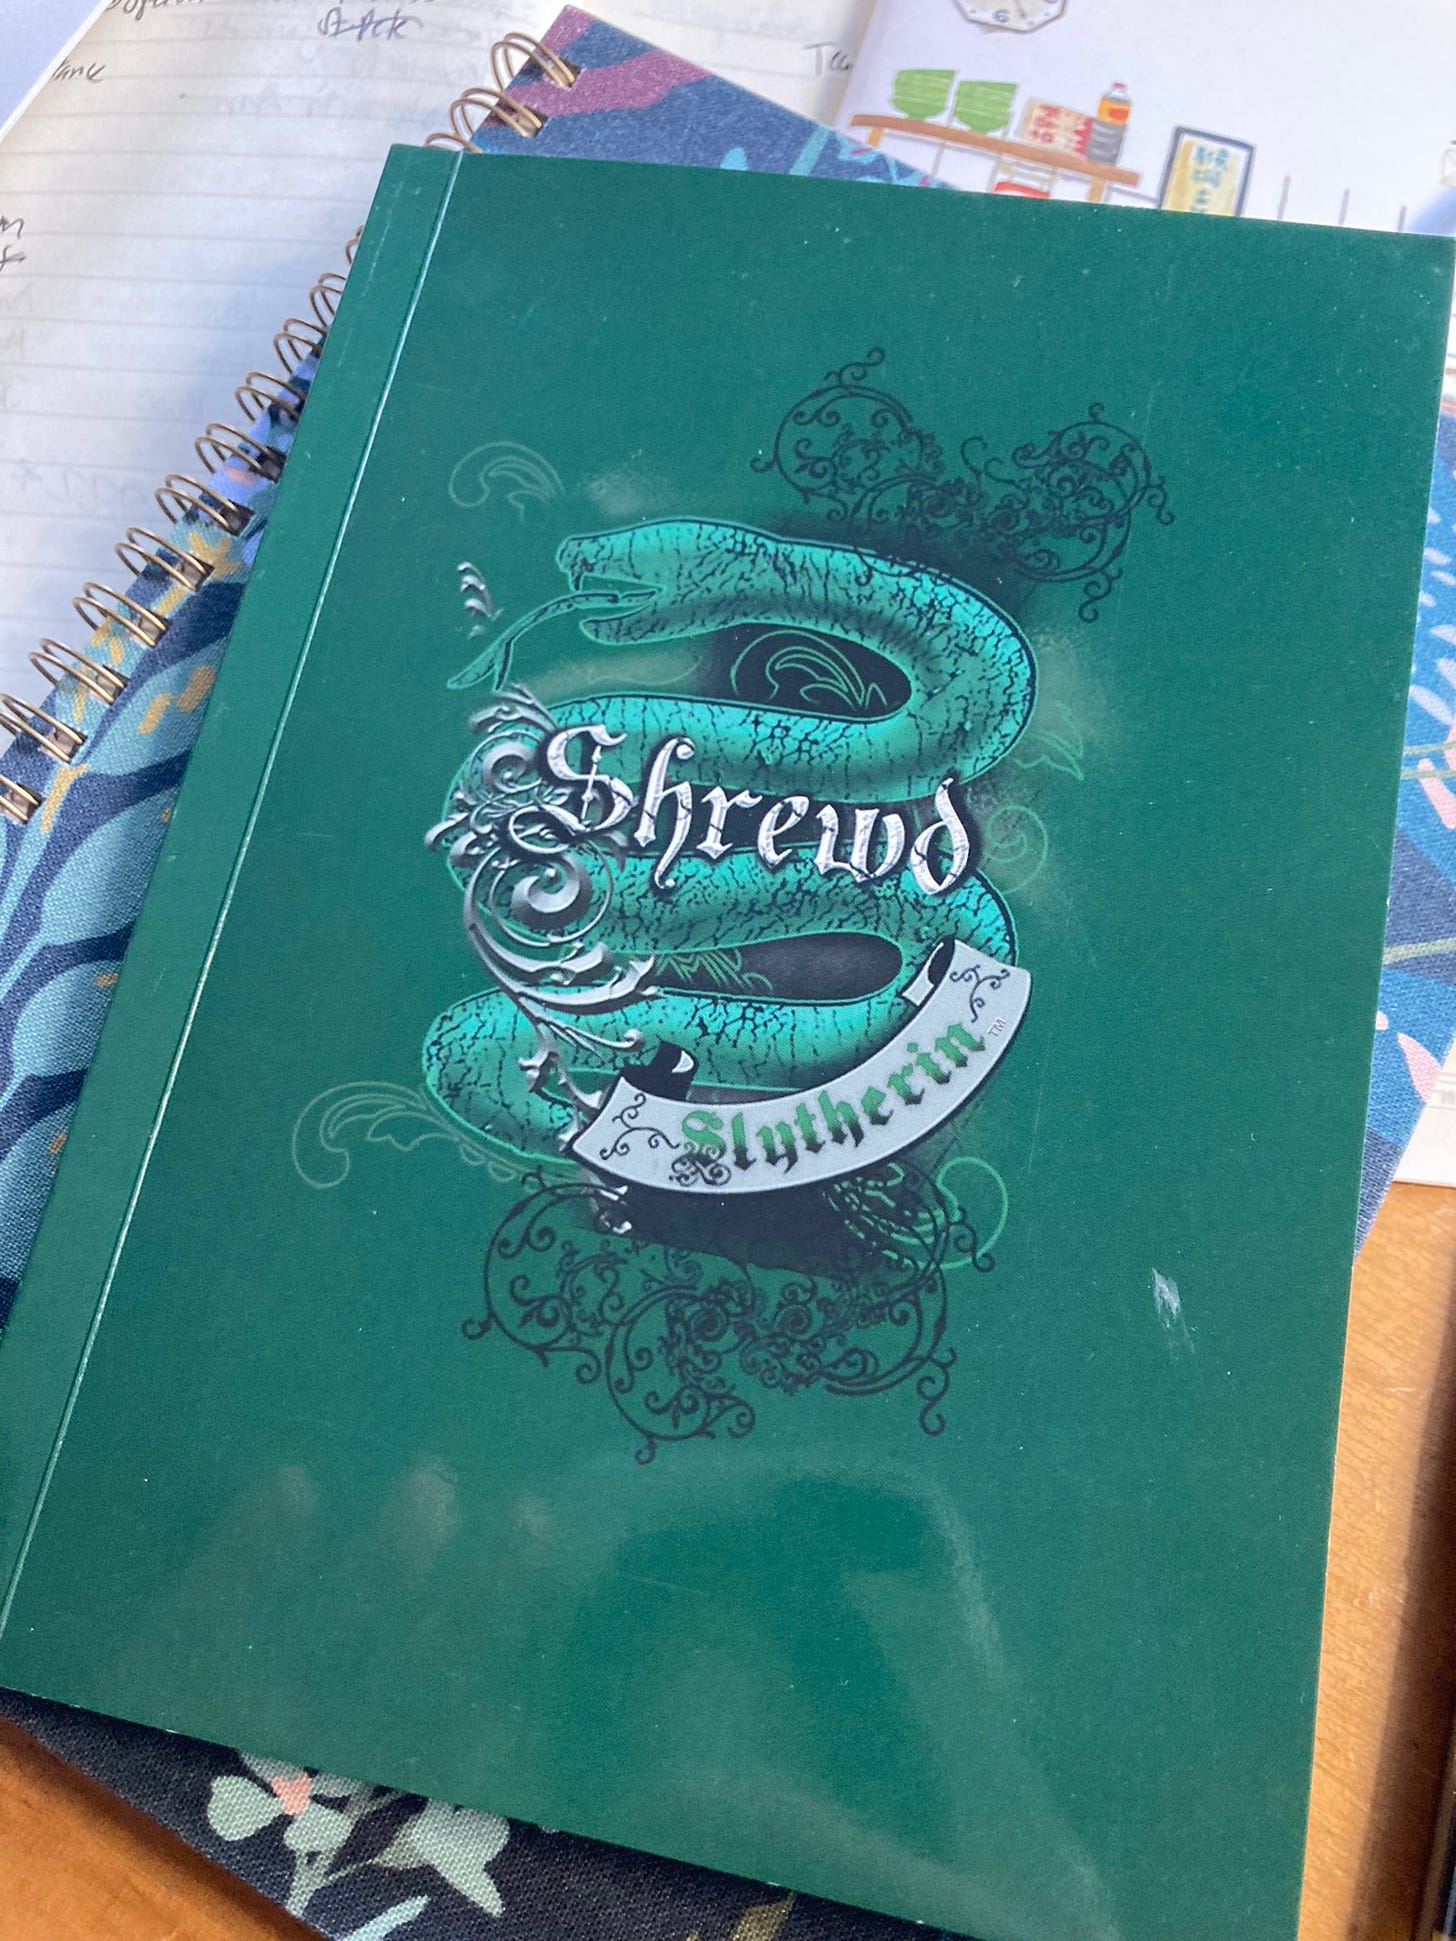 Green notebook with the Slytherin logo and the words "Shrewd"